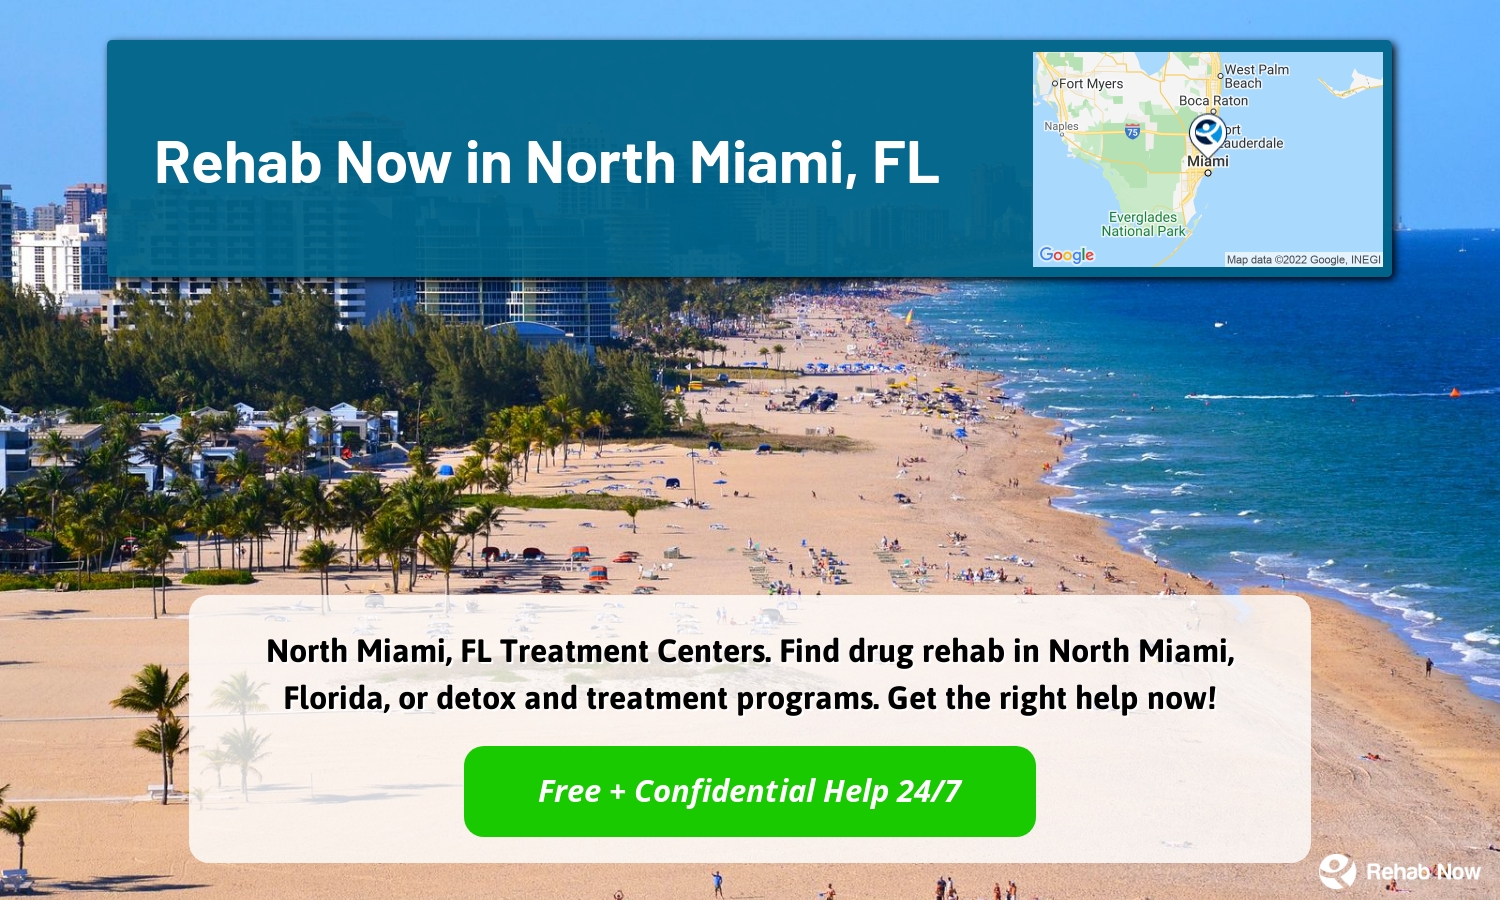 North Miami, FL Treatment Centers. Find drug rehab in North Miami, Florida, or detox and treatment programs. Get the right help now!